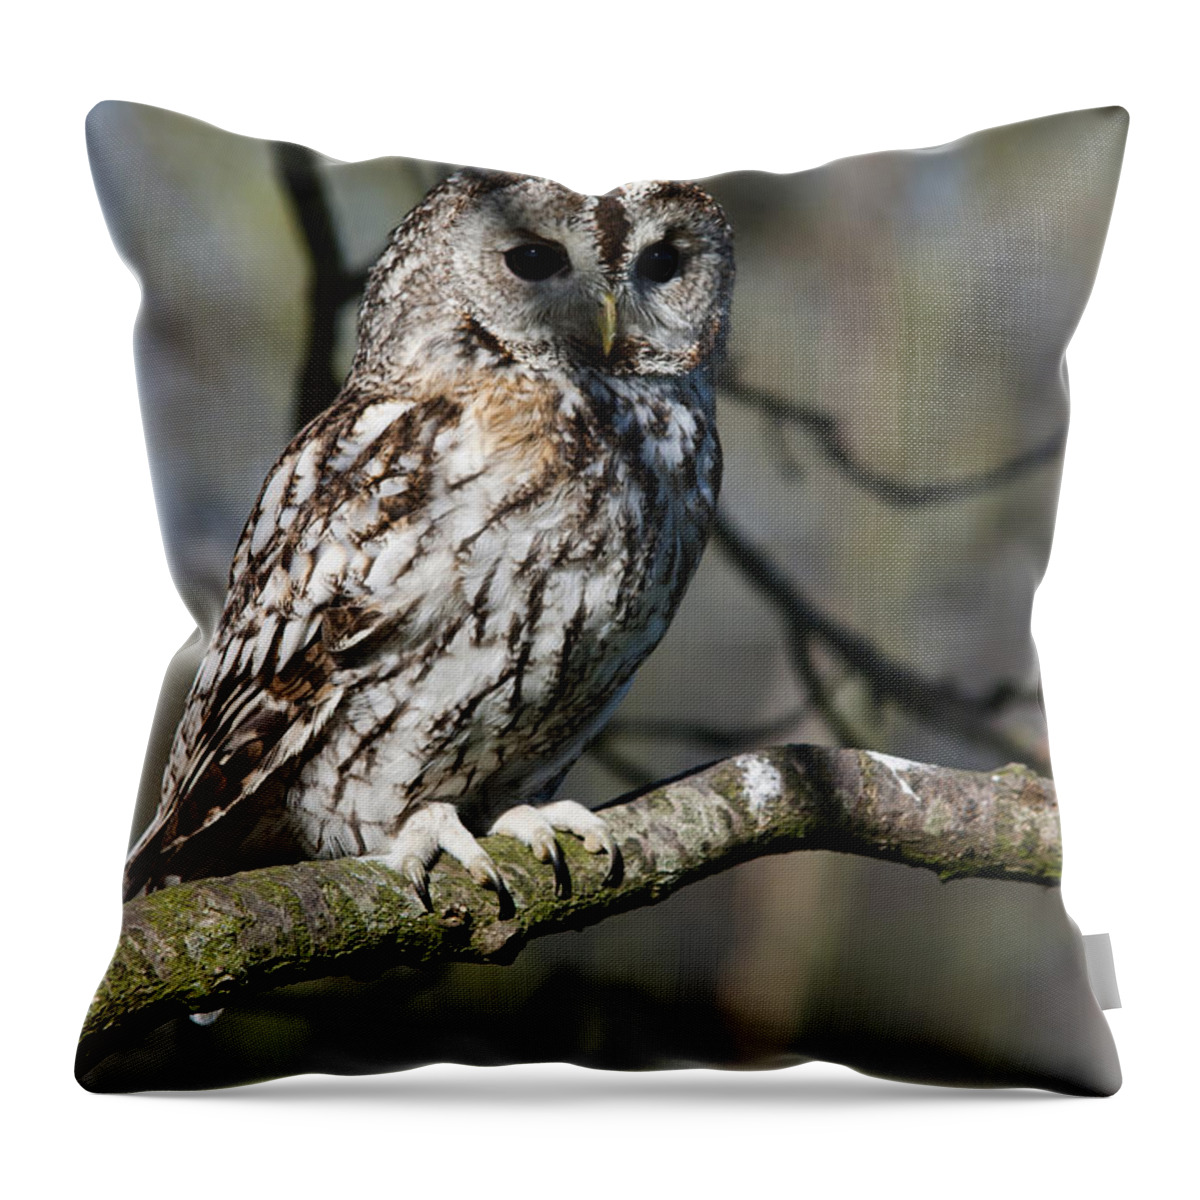 Tawny Owl Throw Pillow featuring the photograph A Tawny Owl by Andy Myatt